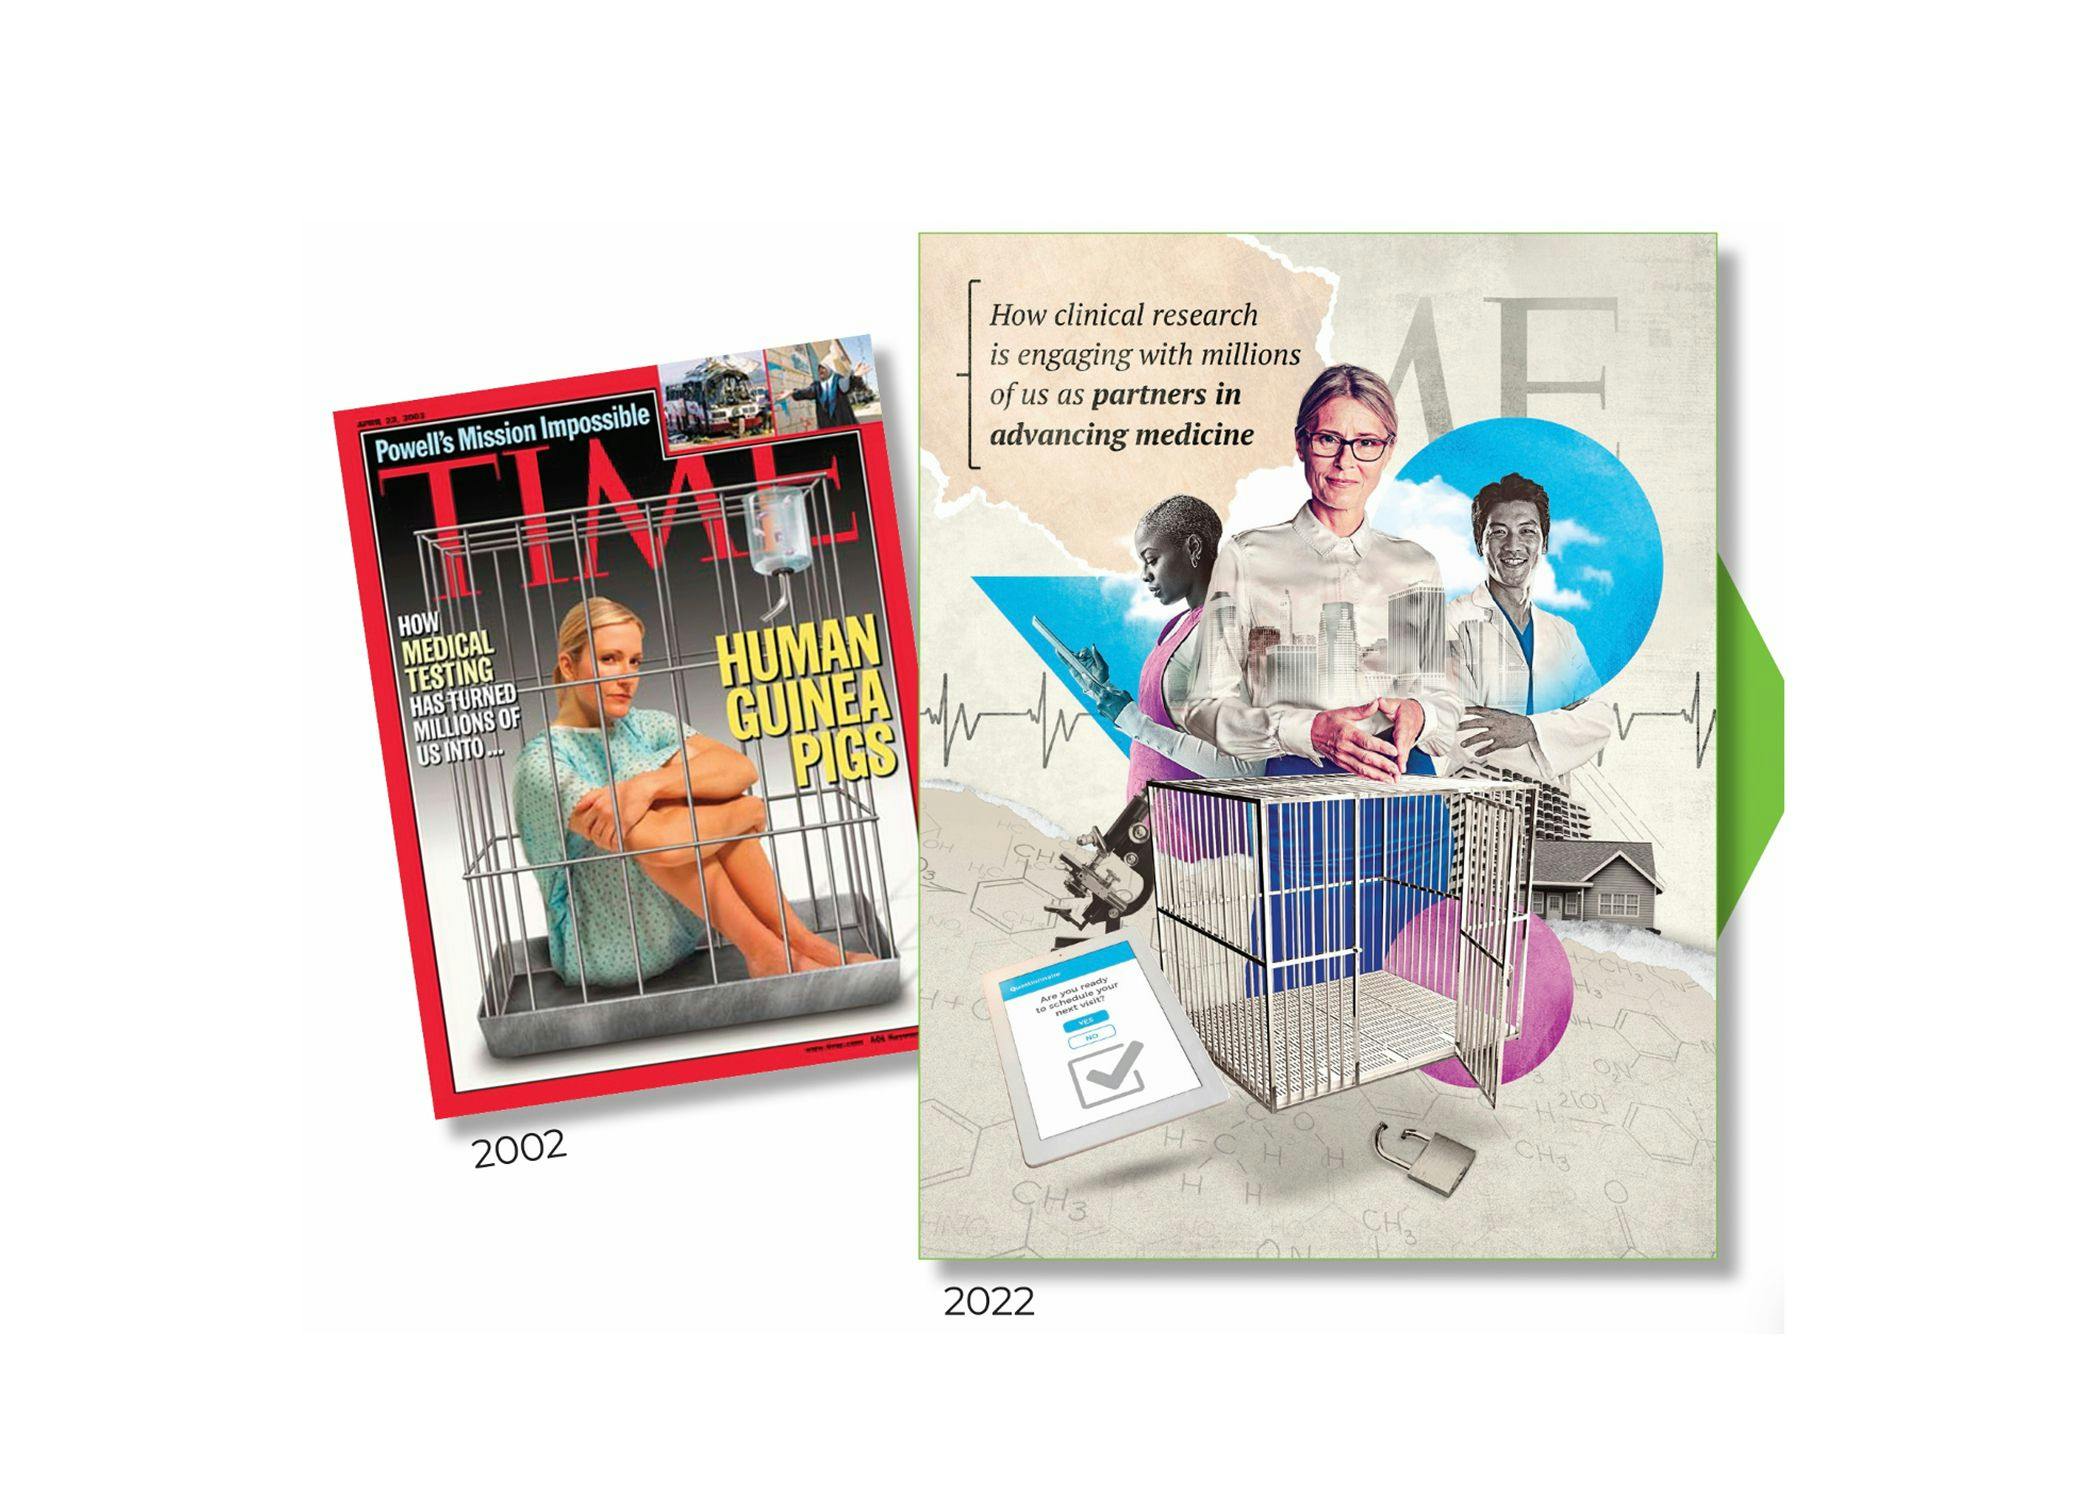 Remembering That TIME Magazine Issue; Celebrating Progress in Patient Engagement